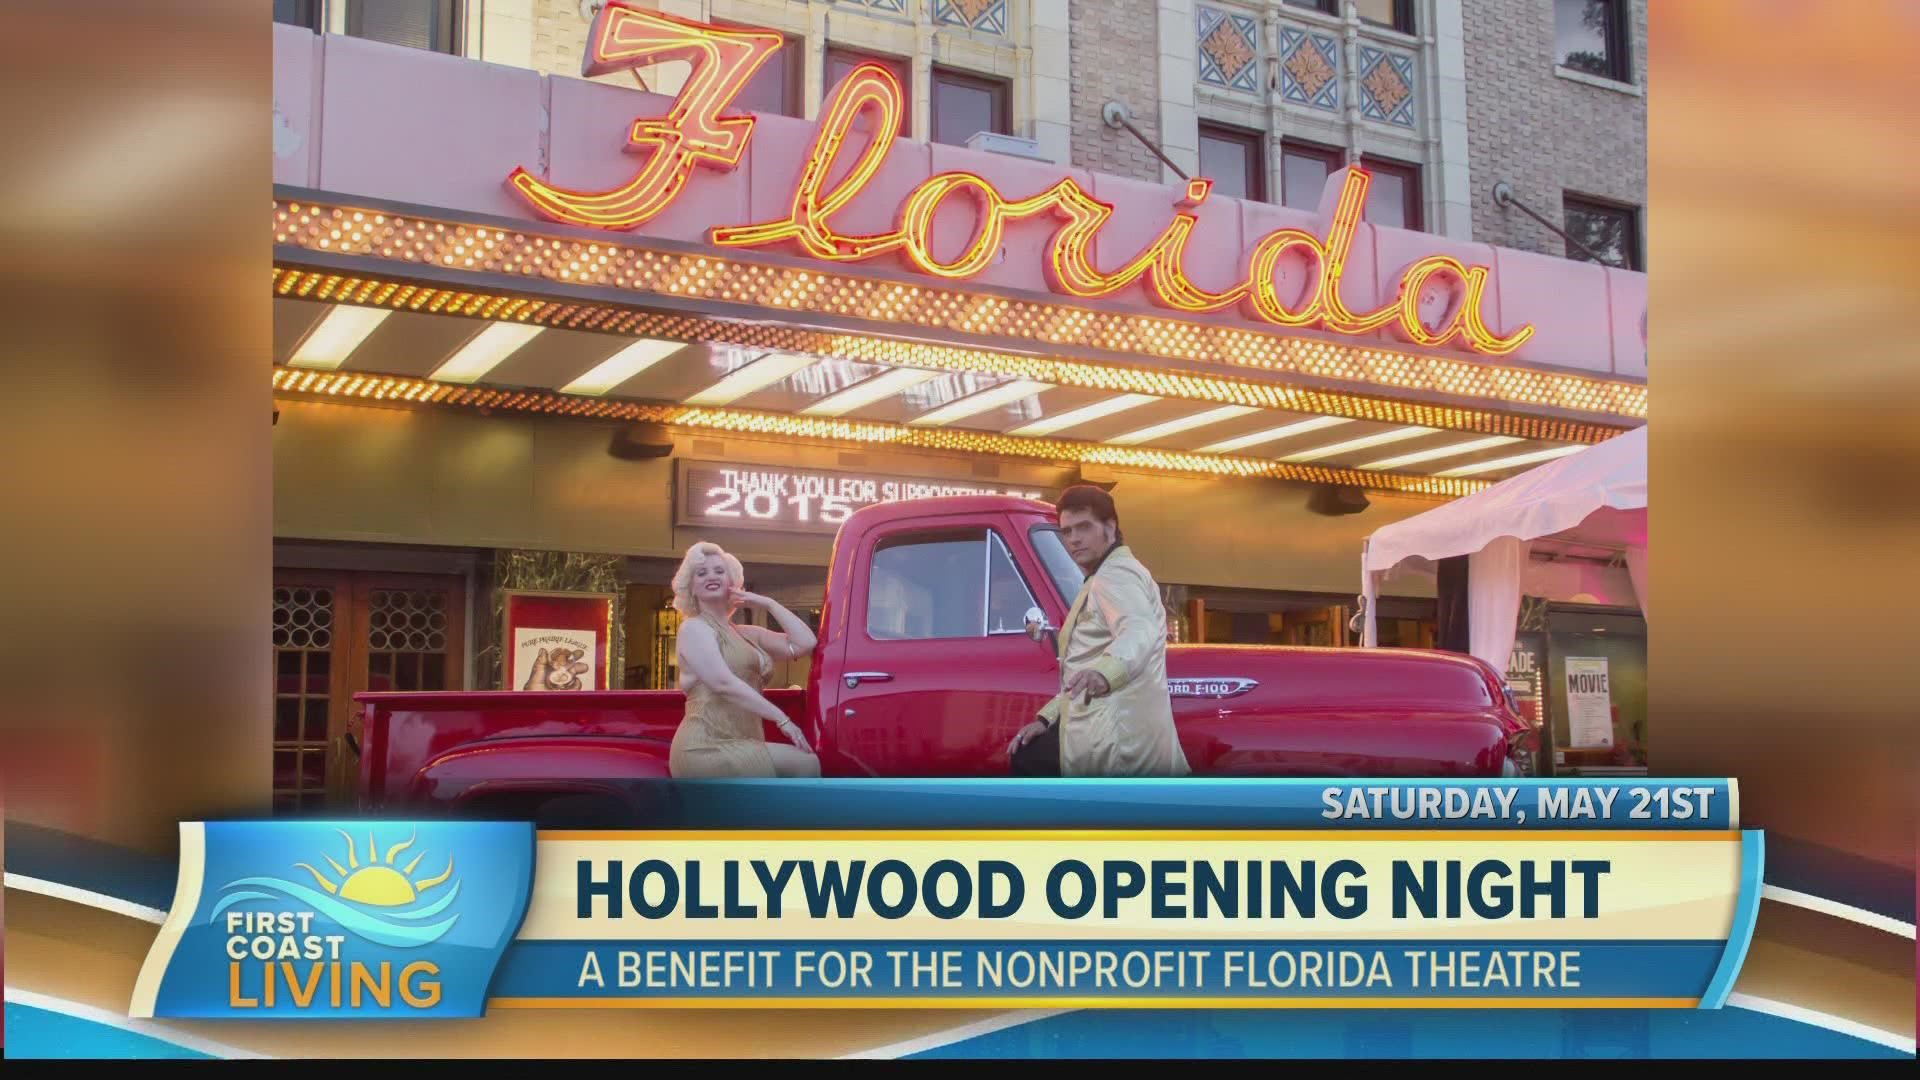 This year's theme is Hollywood Opening Night. Hear from the Florida Theatre President, Numa Saisselin, on what to expect this year.